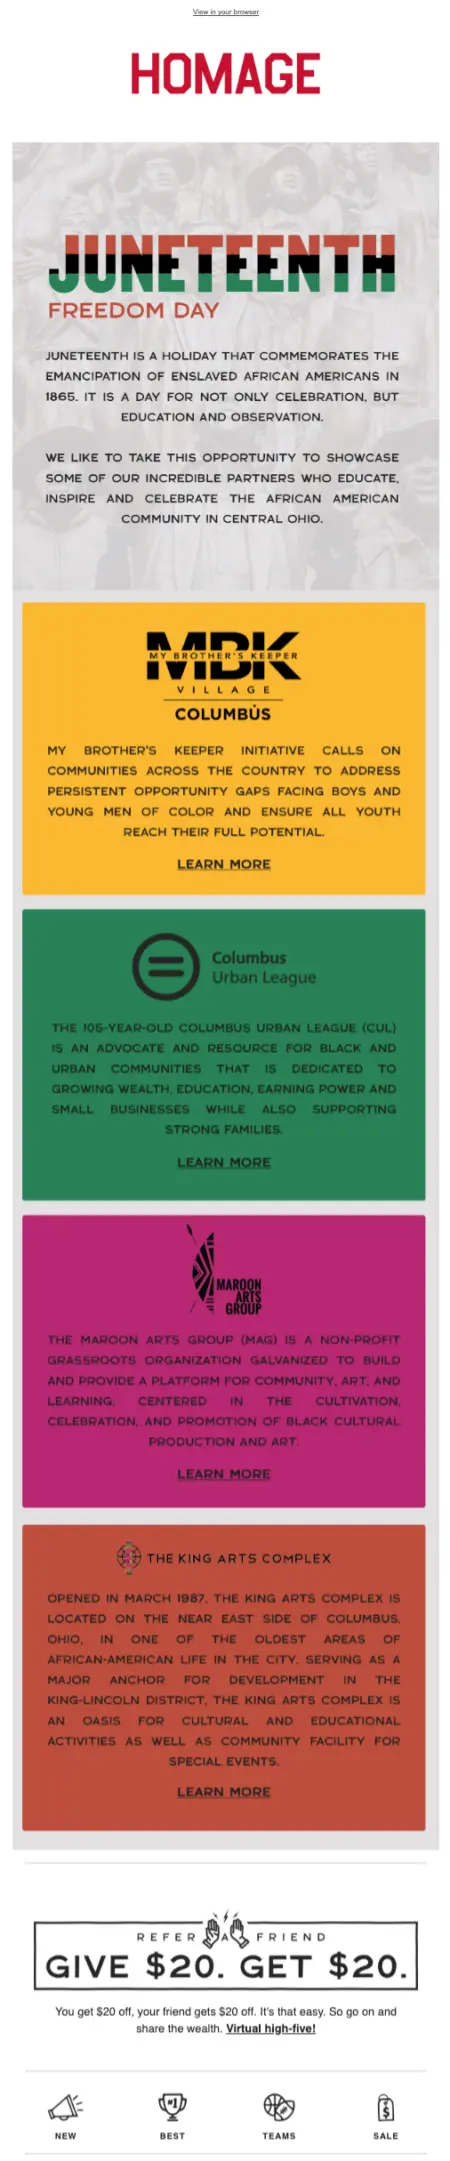 Image shows an email newsletter from apparel brand HOMAGE, educating readers on the history of Juneteenth and sharing information about local partners that support the African American community.